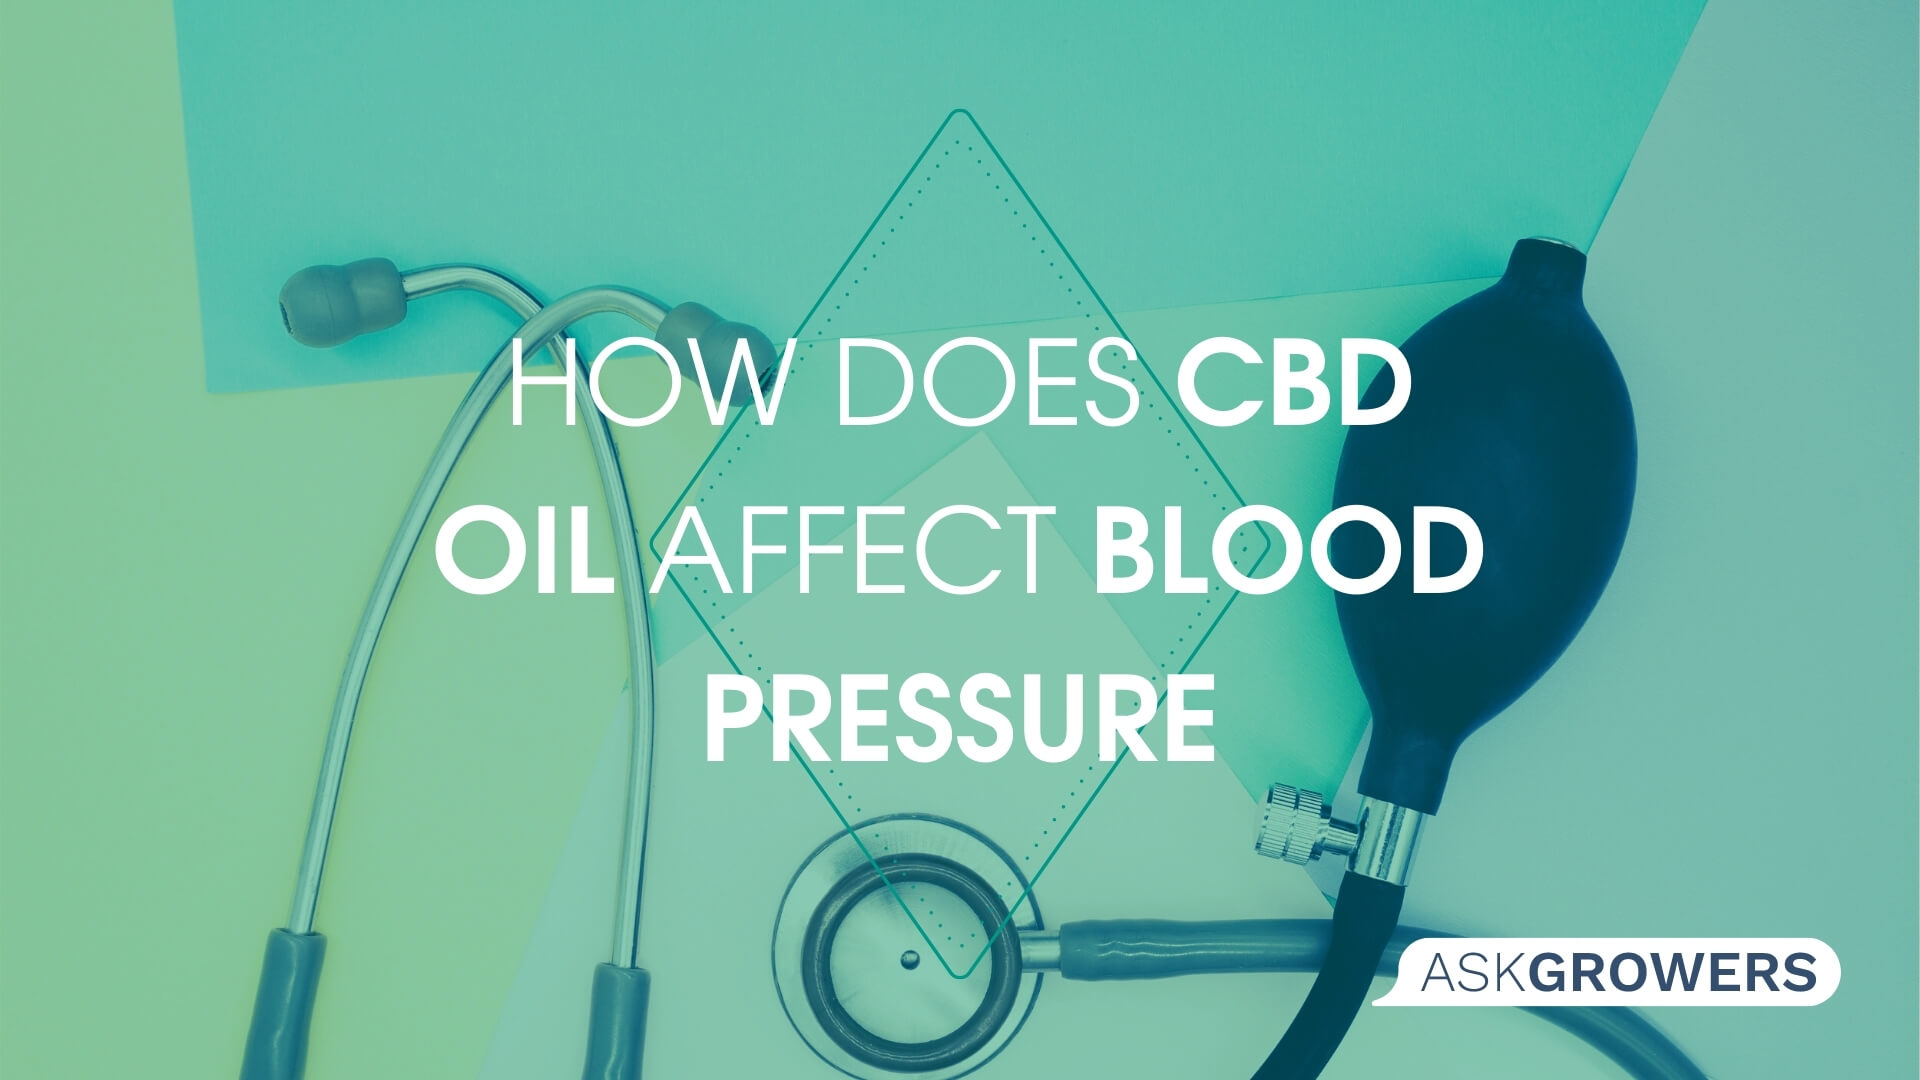 How Does CBD Oil Affect Blood Pressure?